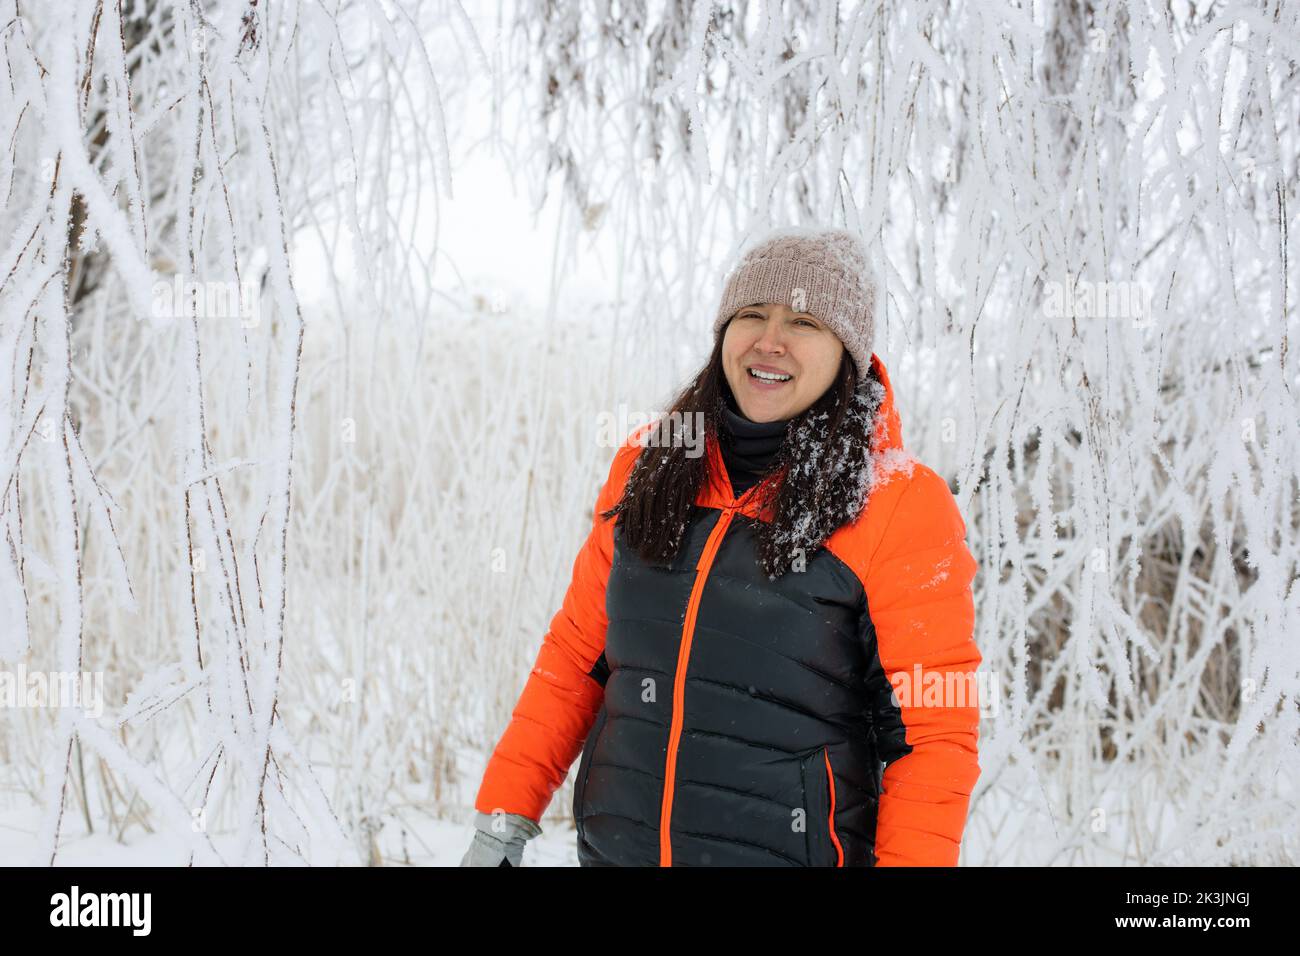 Shining woman of middle age smiling and looking at camera with twigs covered with snow in background on walk in snowy forest. Magic winter time full Stock Photo